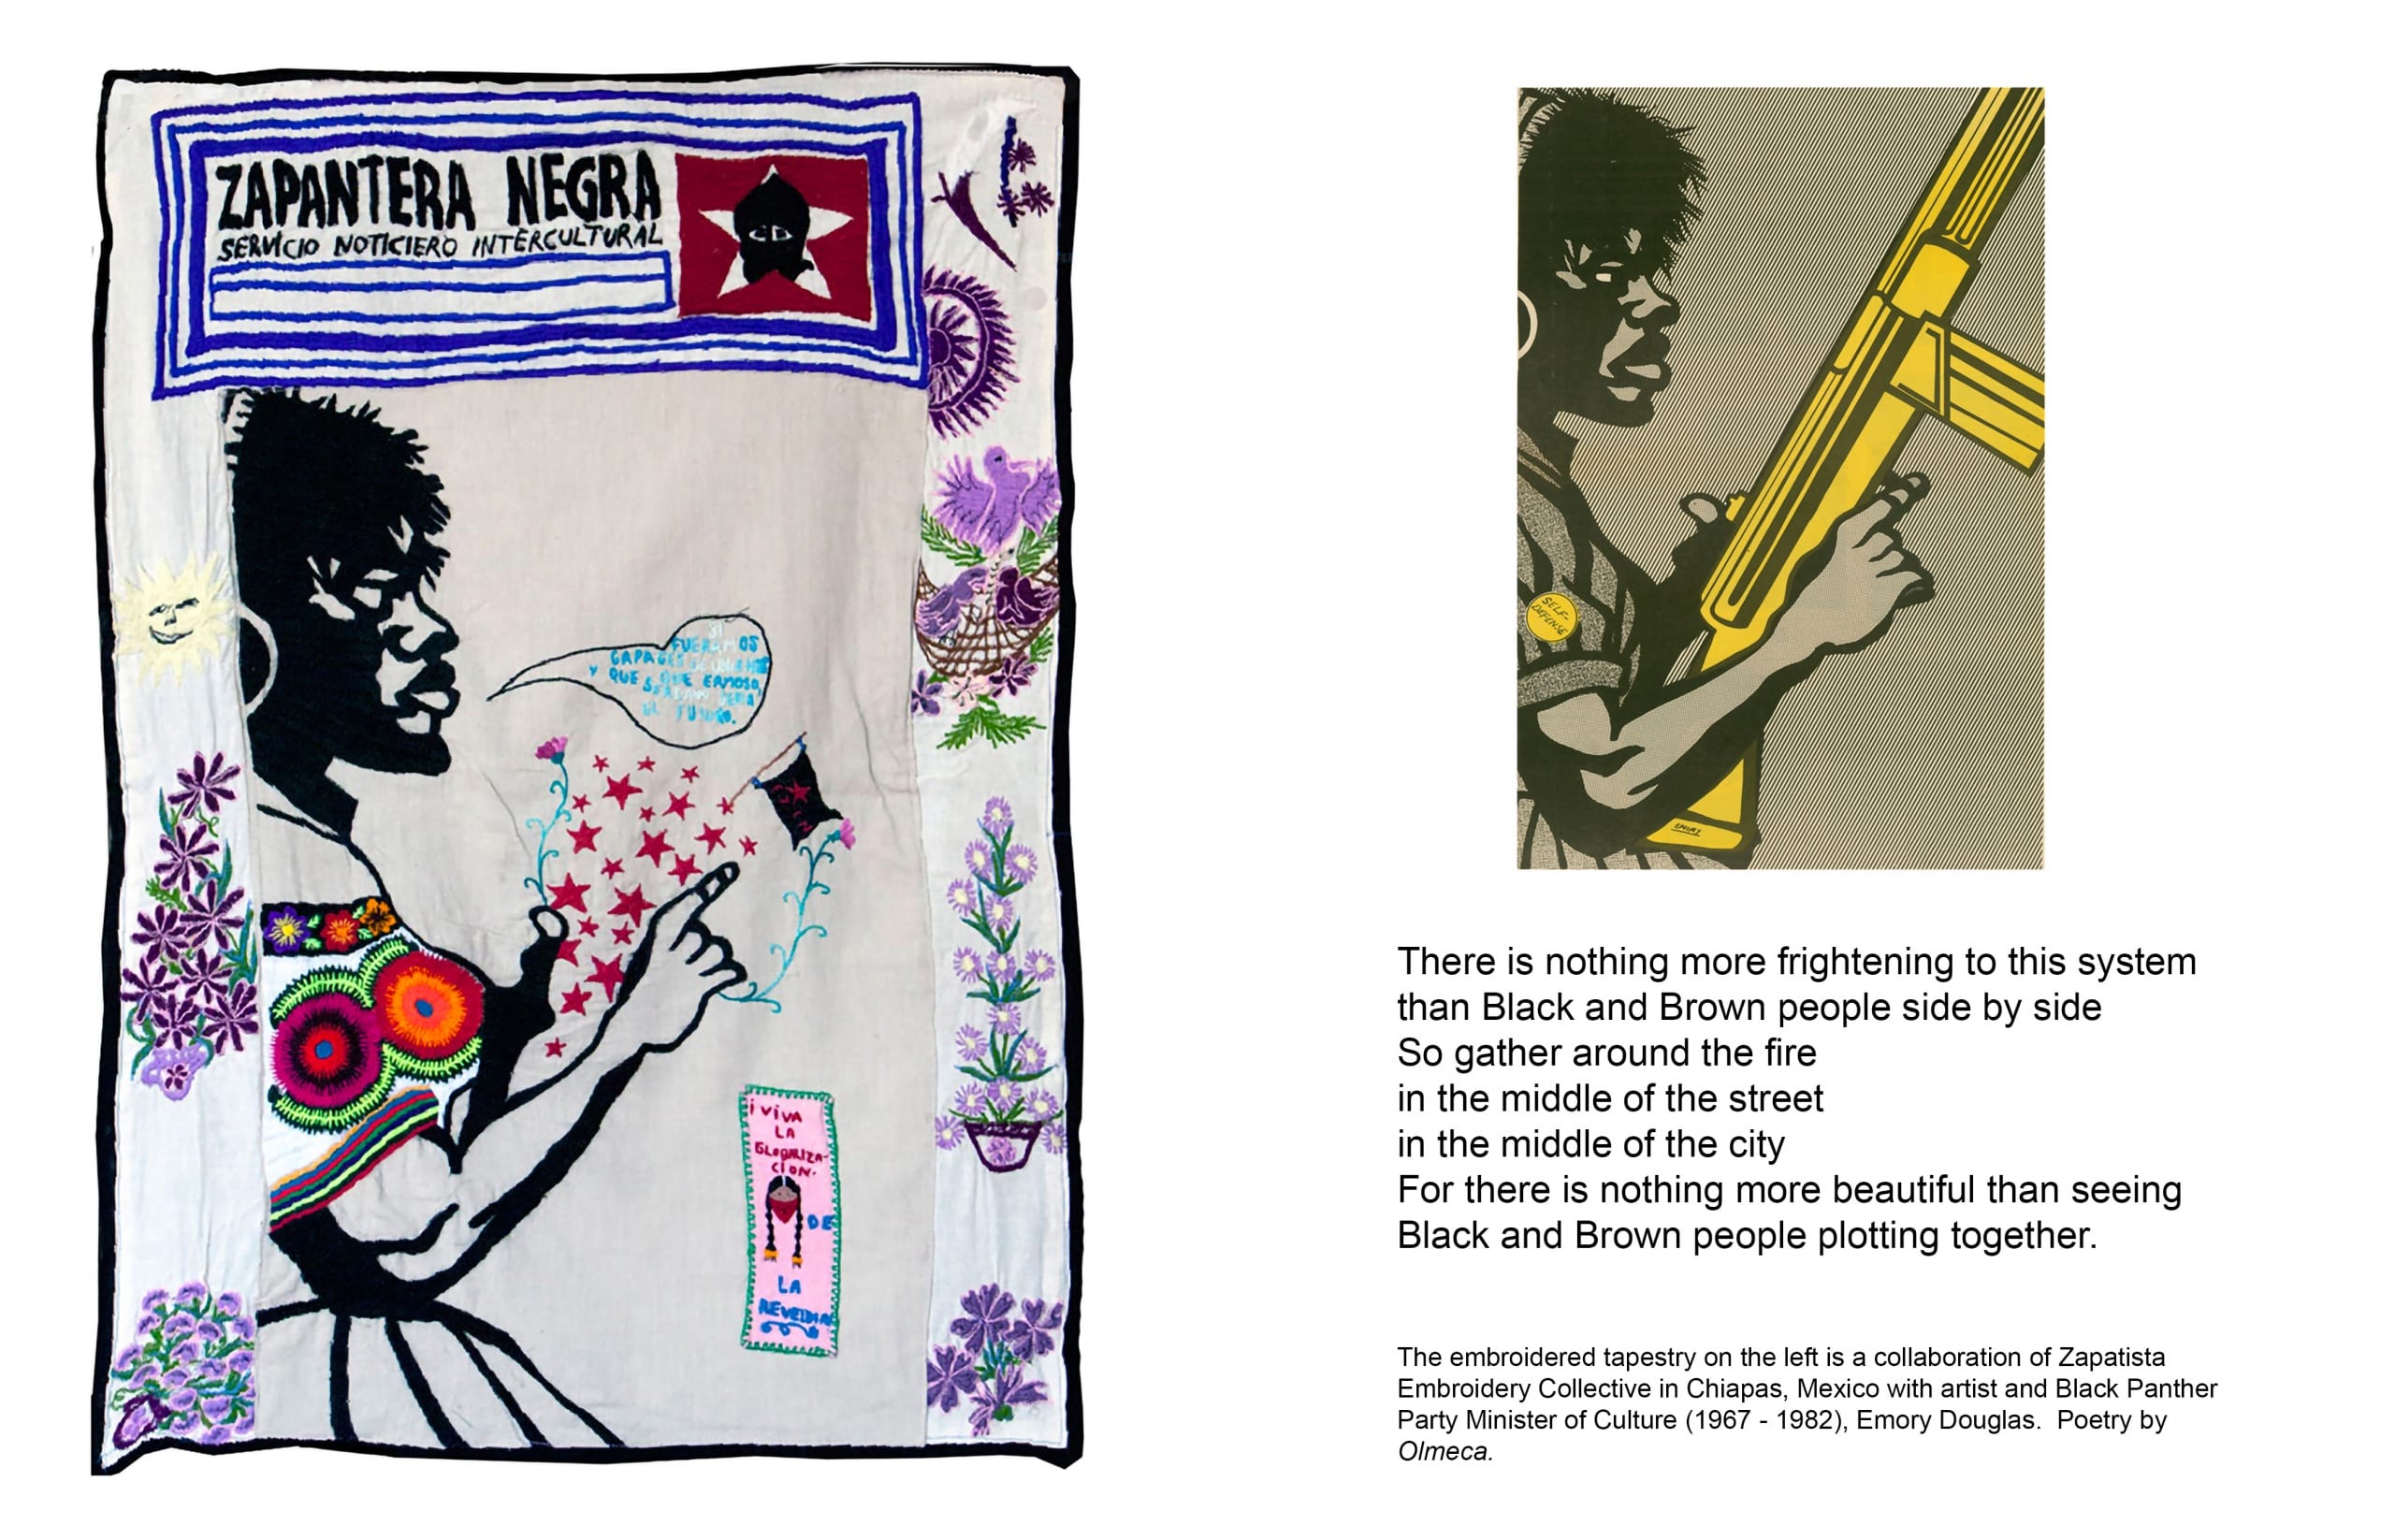 To left, an embroidery made by the Zapatista Embroidery Collective, based on an image drawn by Emory Douglas of a woman armed and ready for revolution, which appears to the right of the layout. In the embroidery version, the woman's gun has been replaced with flowers, stars, and the Zapatista flag and her military-style garments have been replaced with traditional huipil style dress. Below the original Douglas image, a poem appears